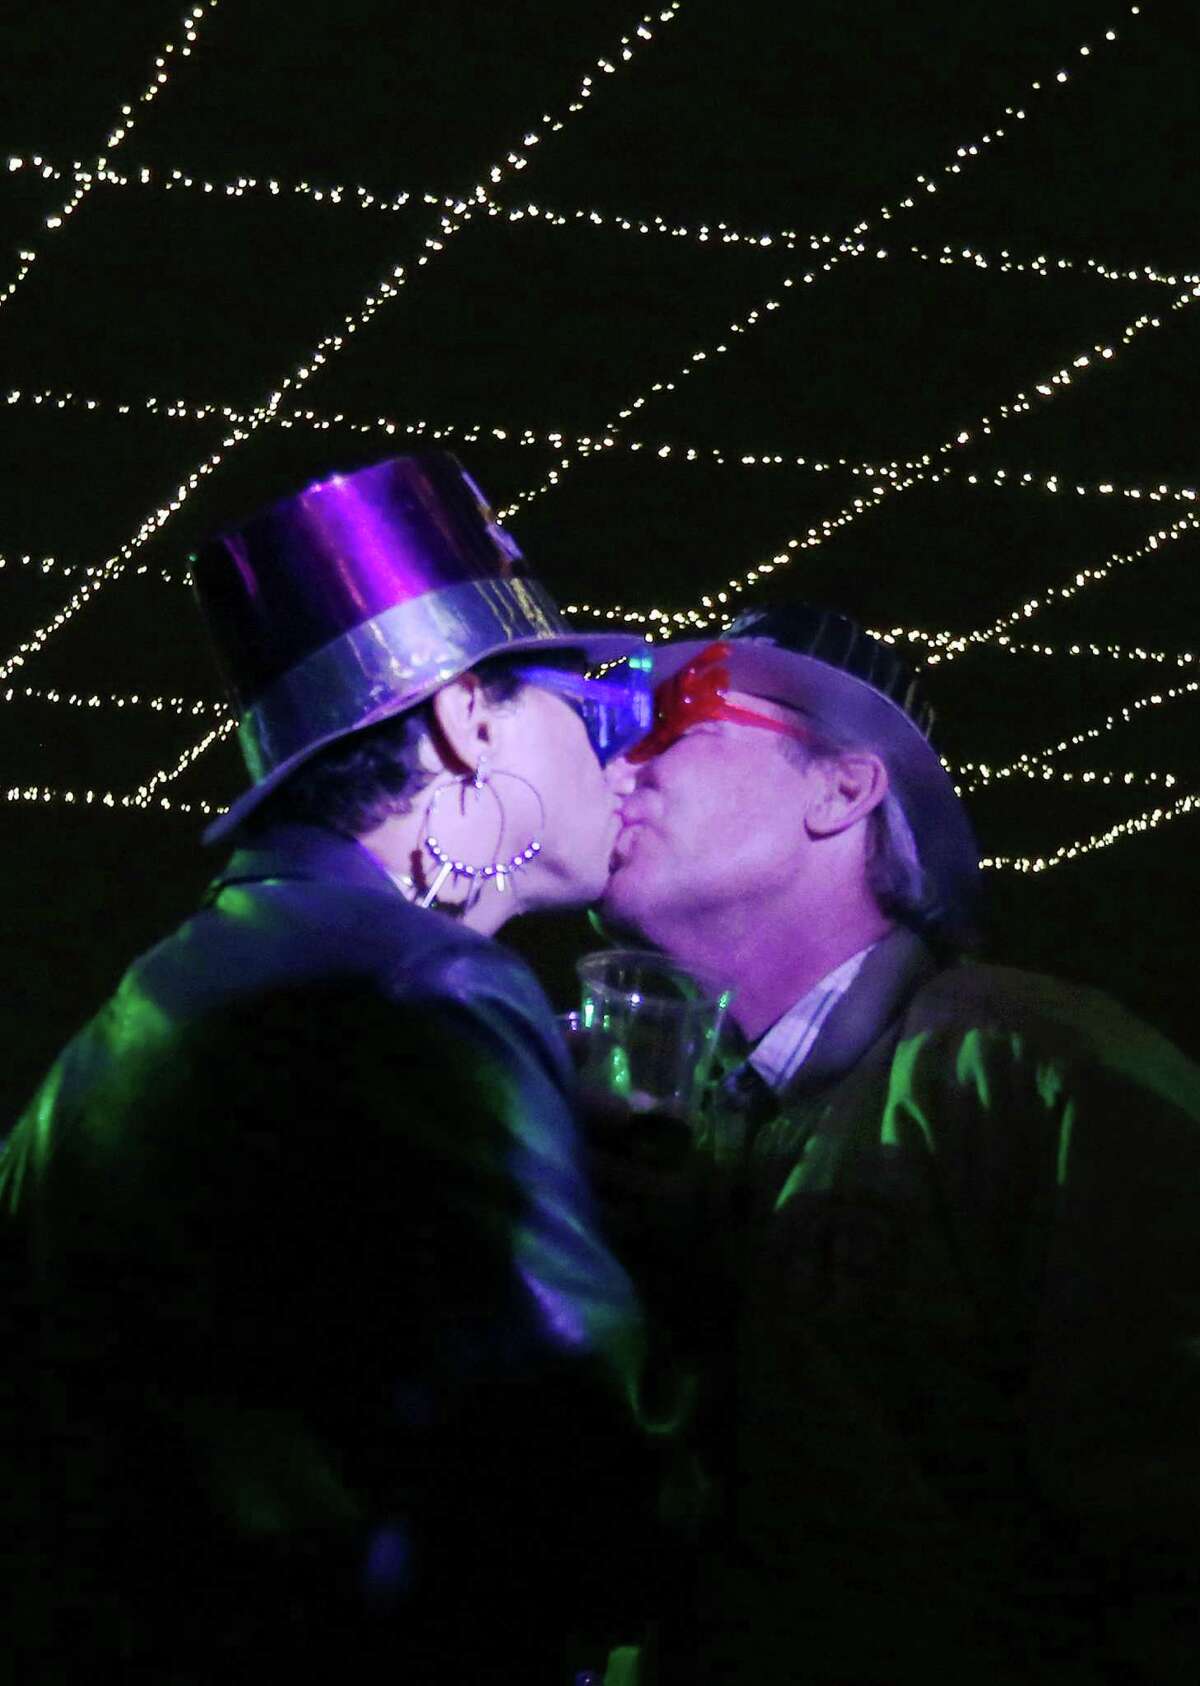 ﻿Ring in the new year with a kiss at one of the many events throughout the Houston area.﻿